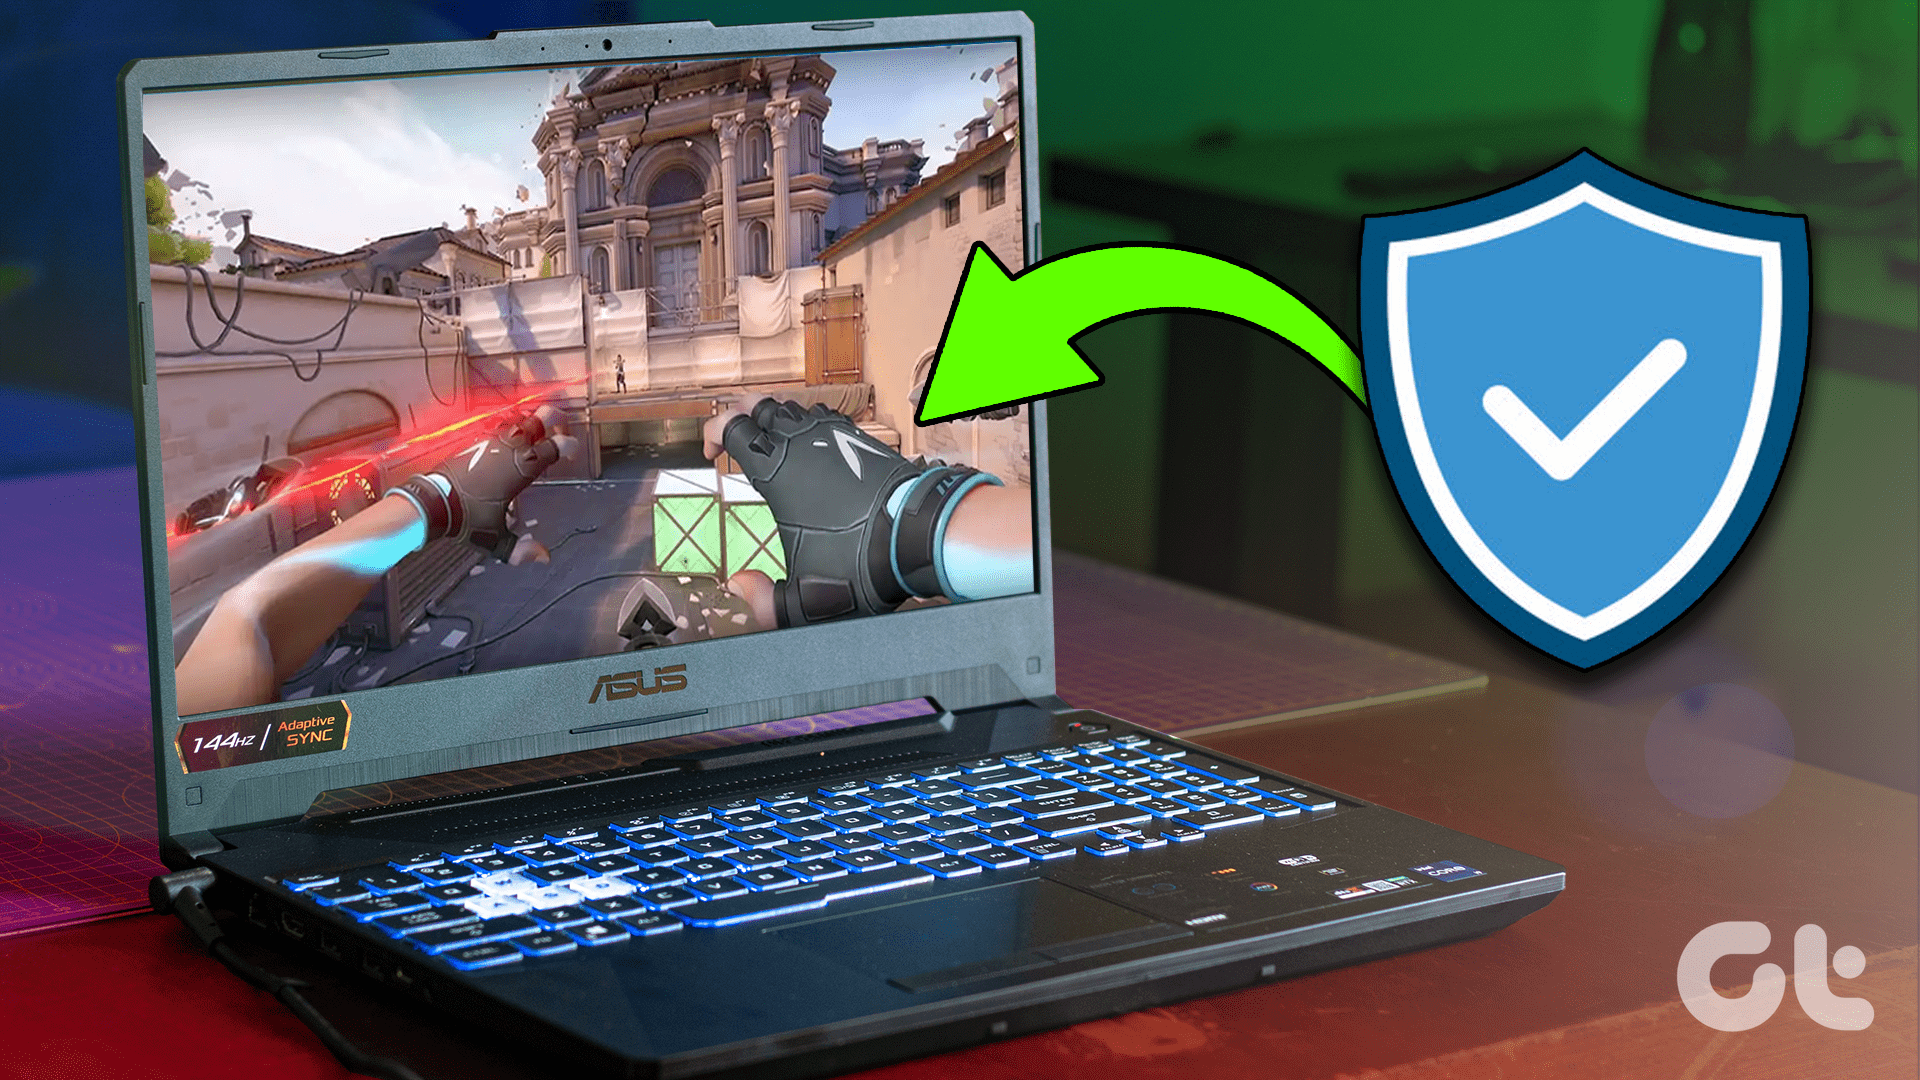 Should You Have Antivirus in Your Gaming Laptop or PC?